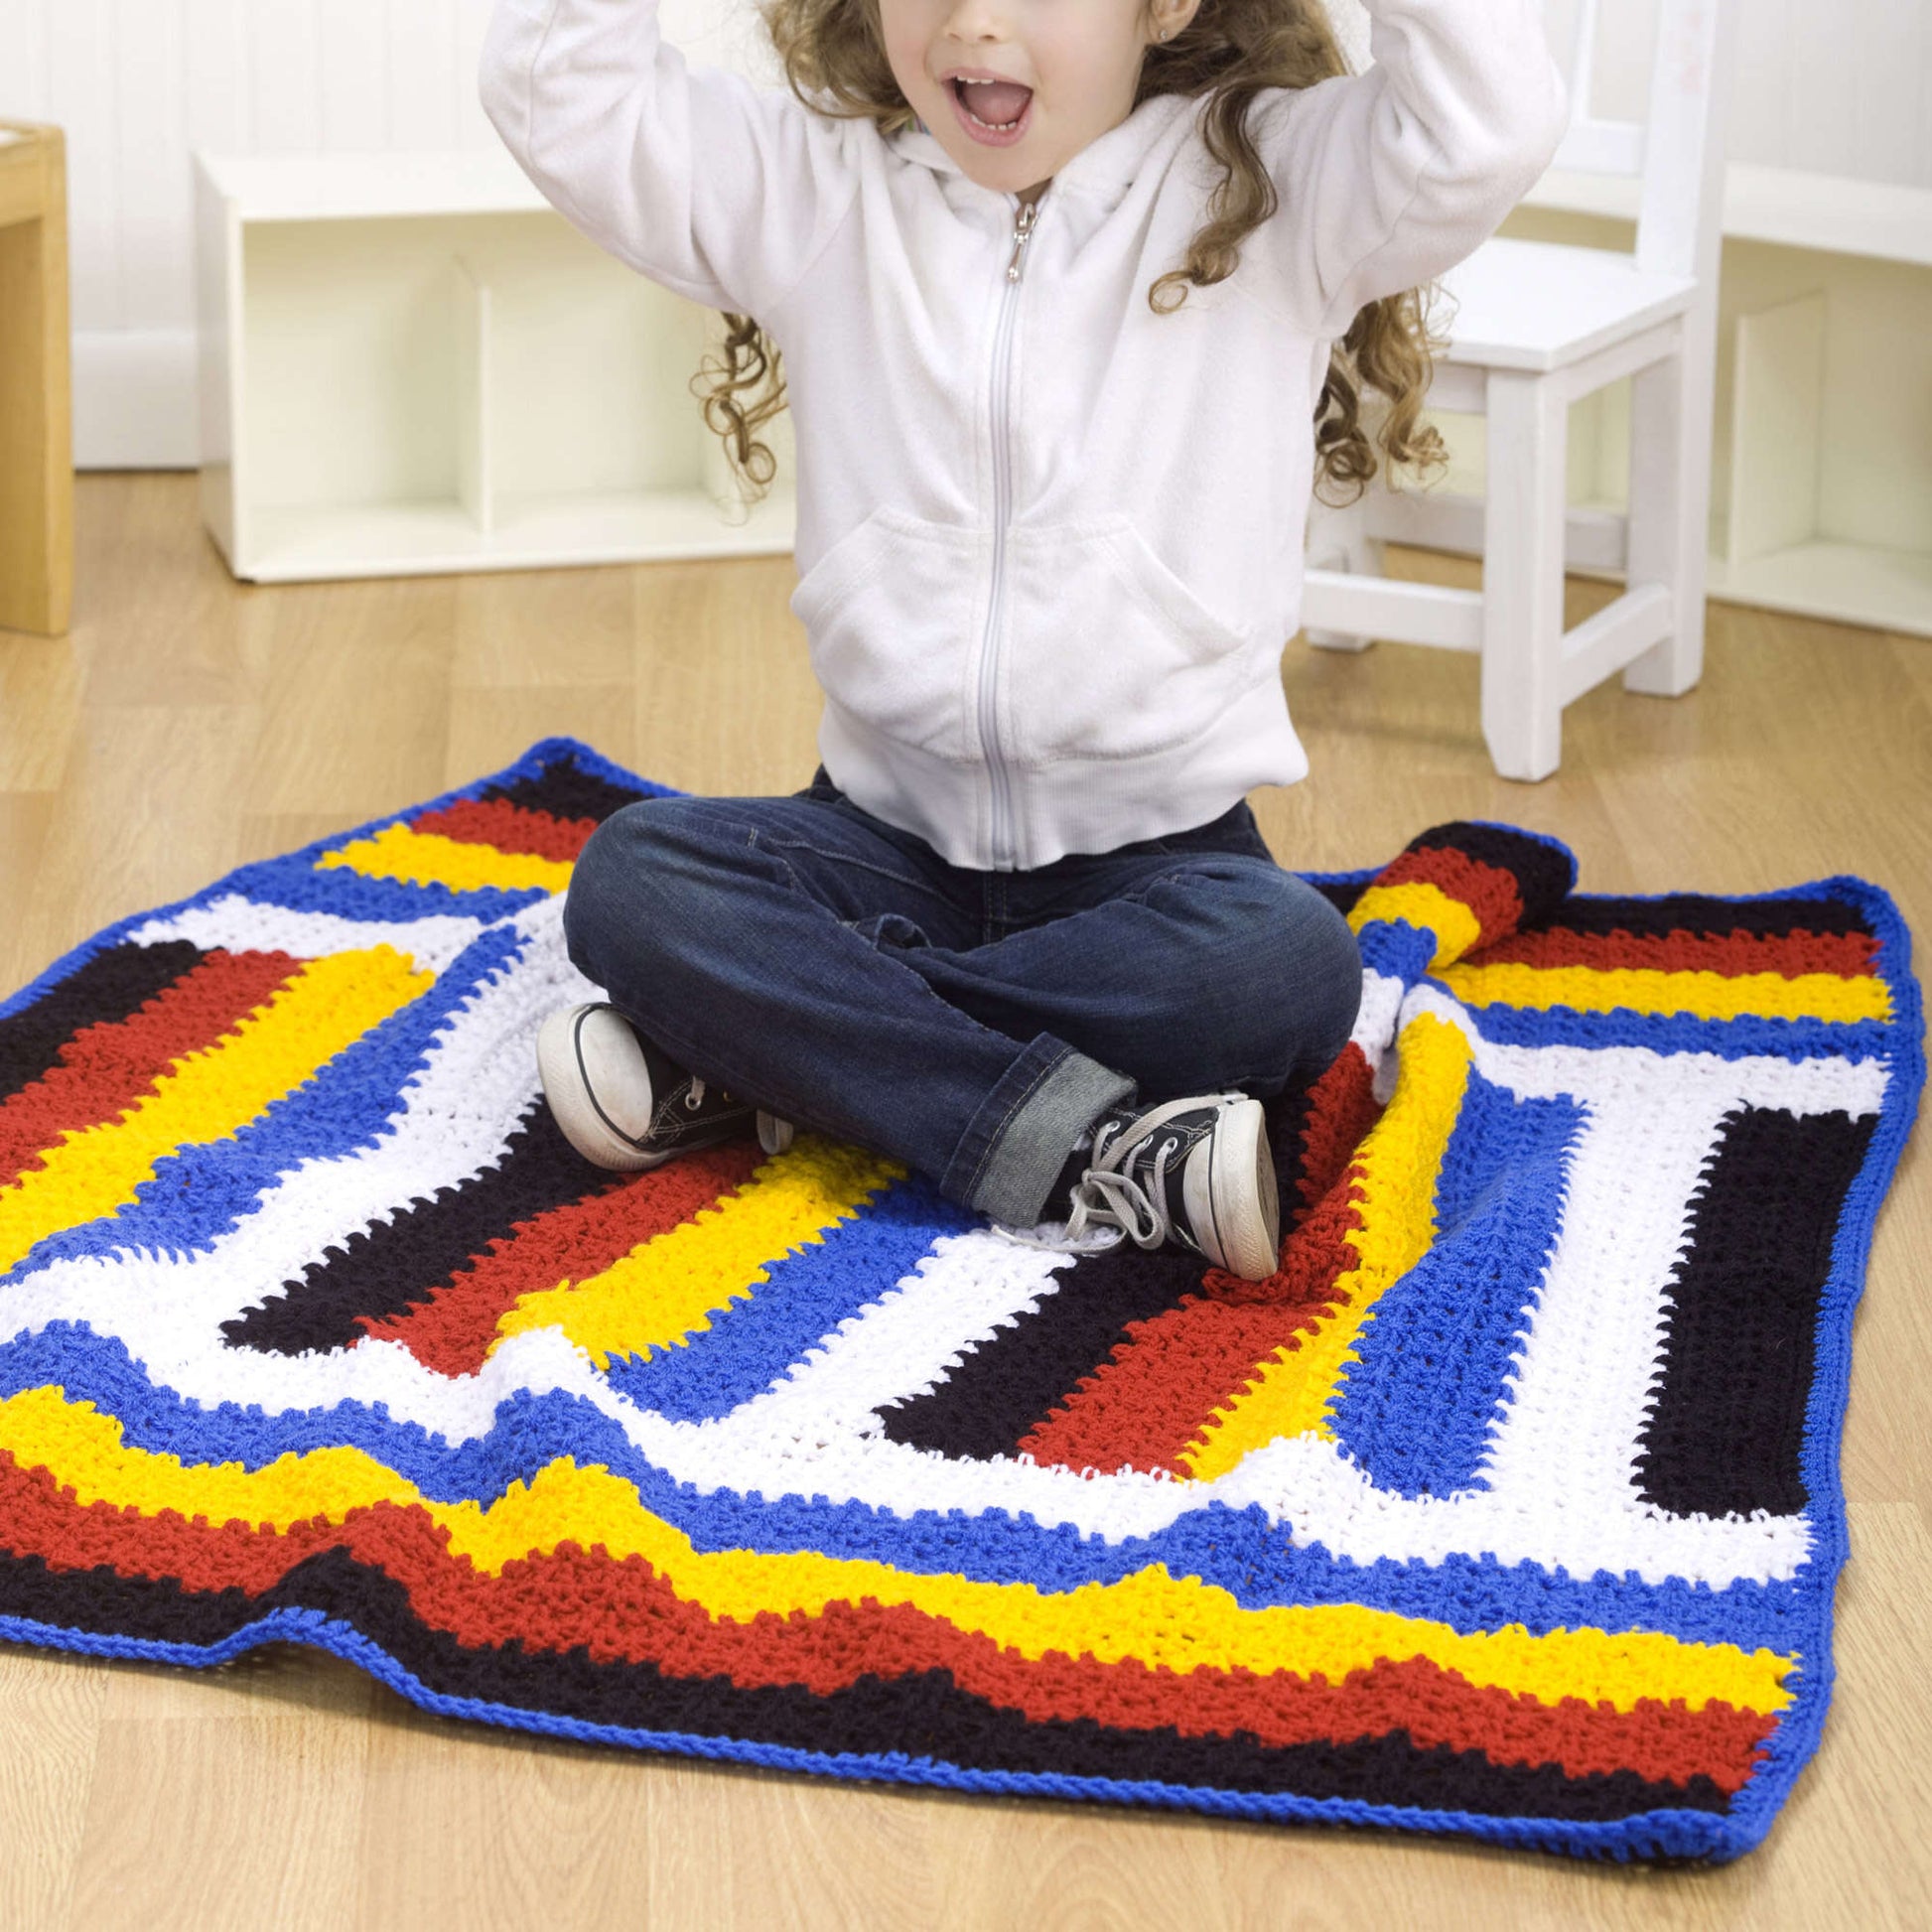 Free Red Heart Kid's Stripes Throw Pattern